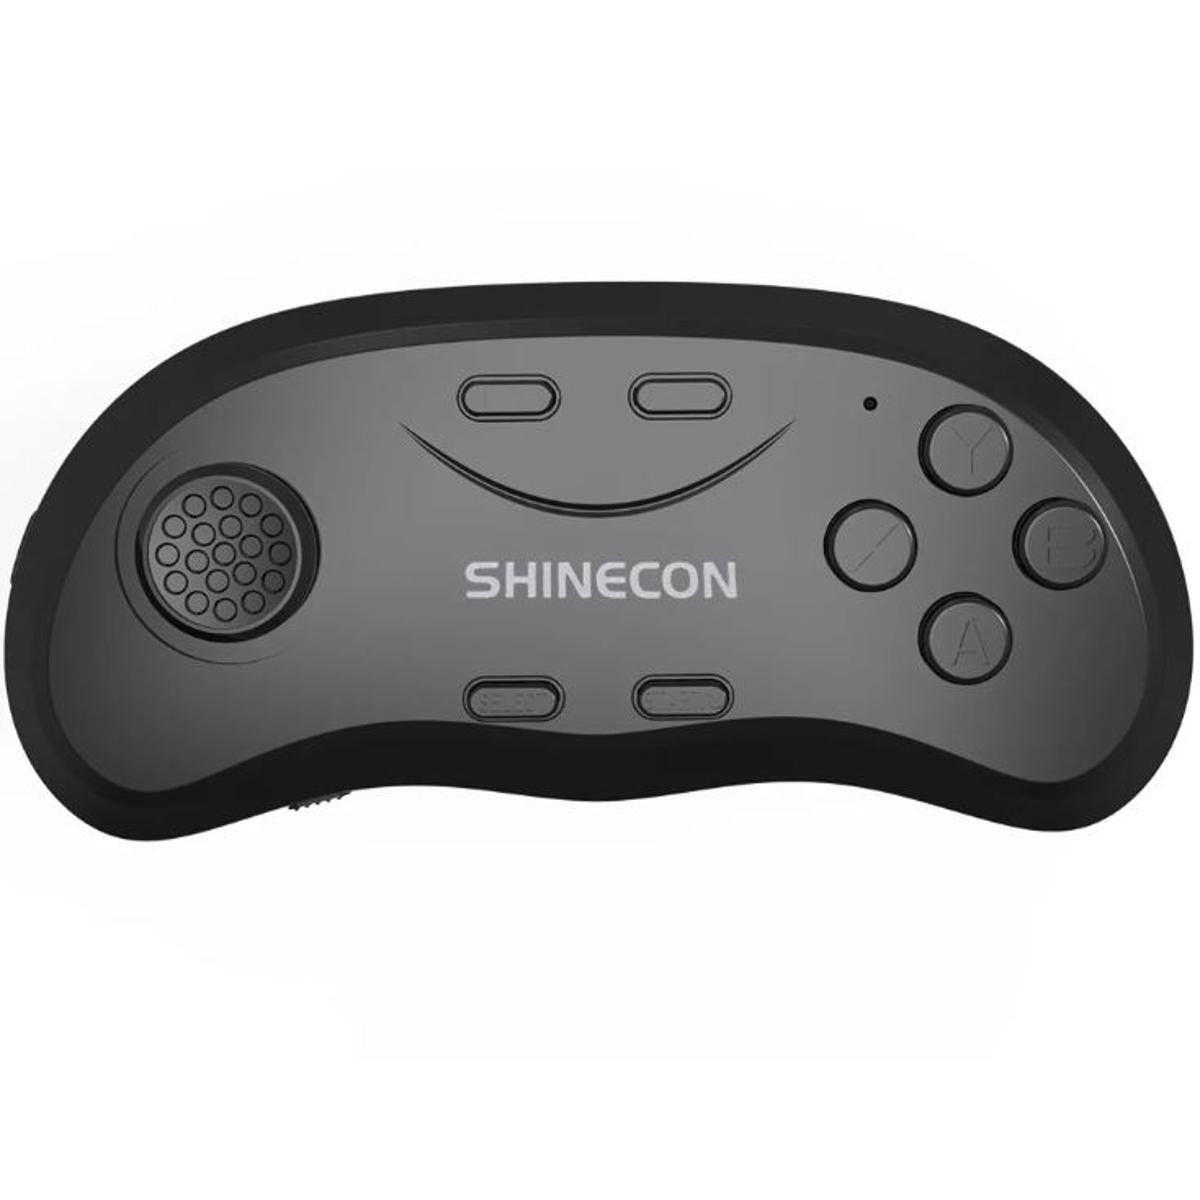 Shinecon Universal VR Controller Wireless Fit For Bluetooth Remote Joystick Gamepad Music Selfie 3D Games for iPhone Android PC